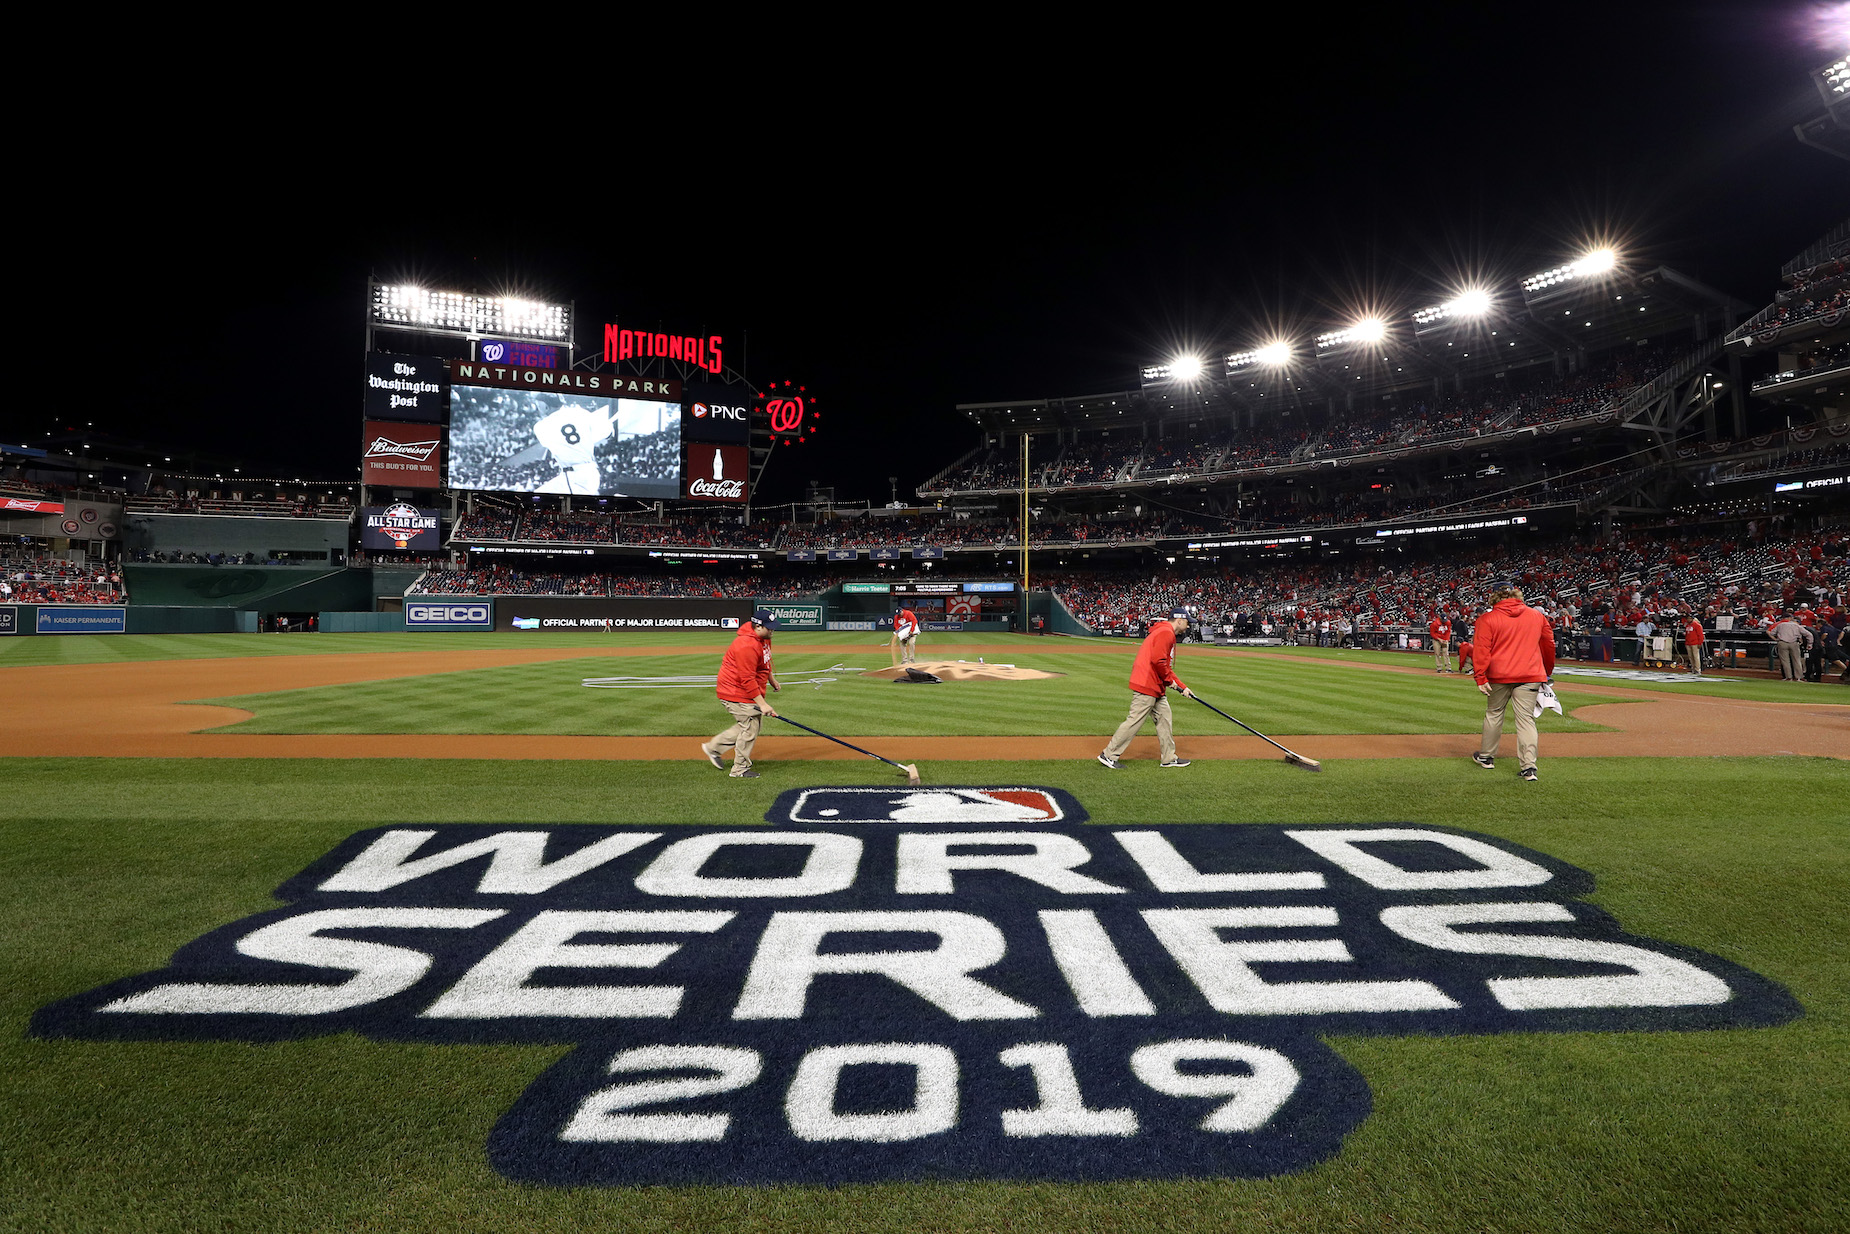 Why Is the World Series Called the World Series When It Only Includes Teams From the United States?